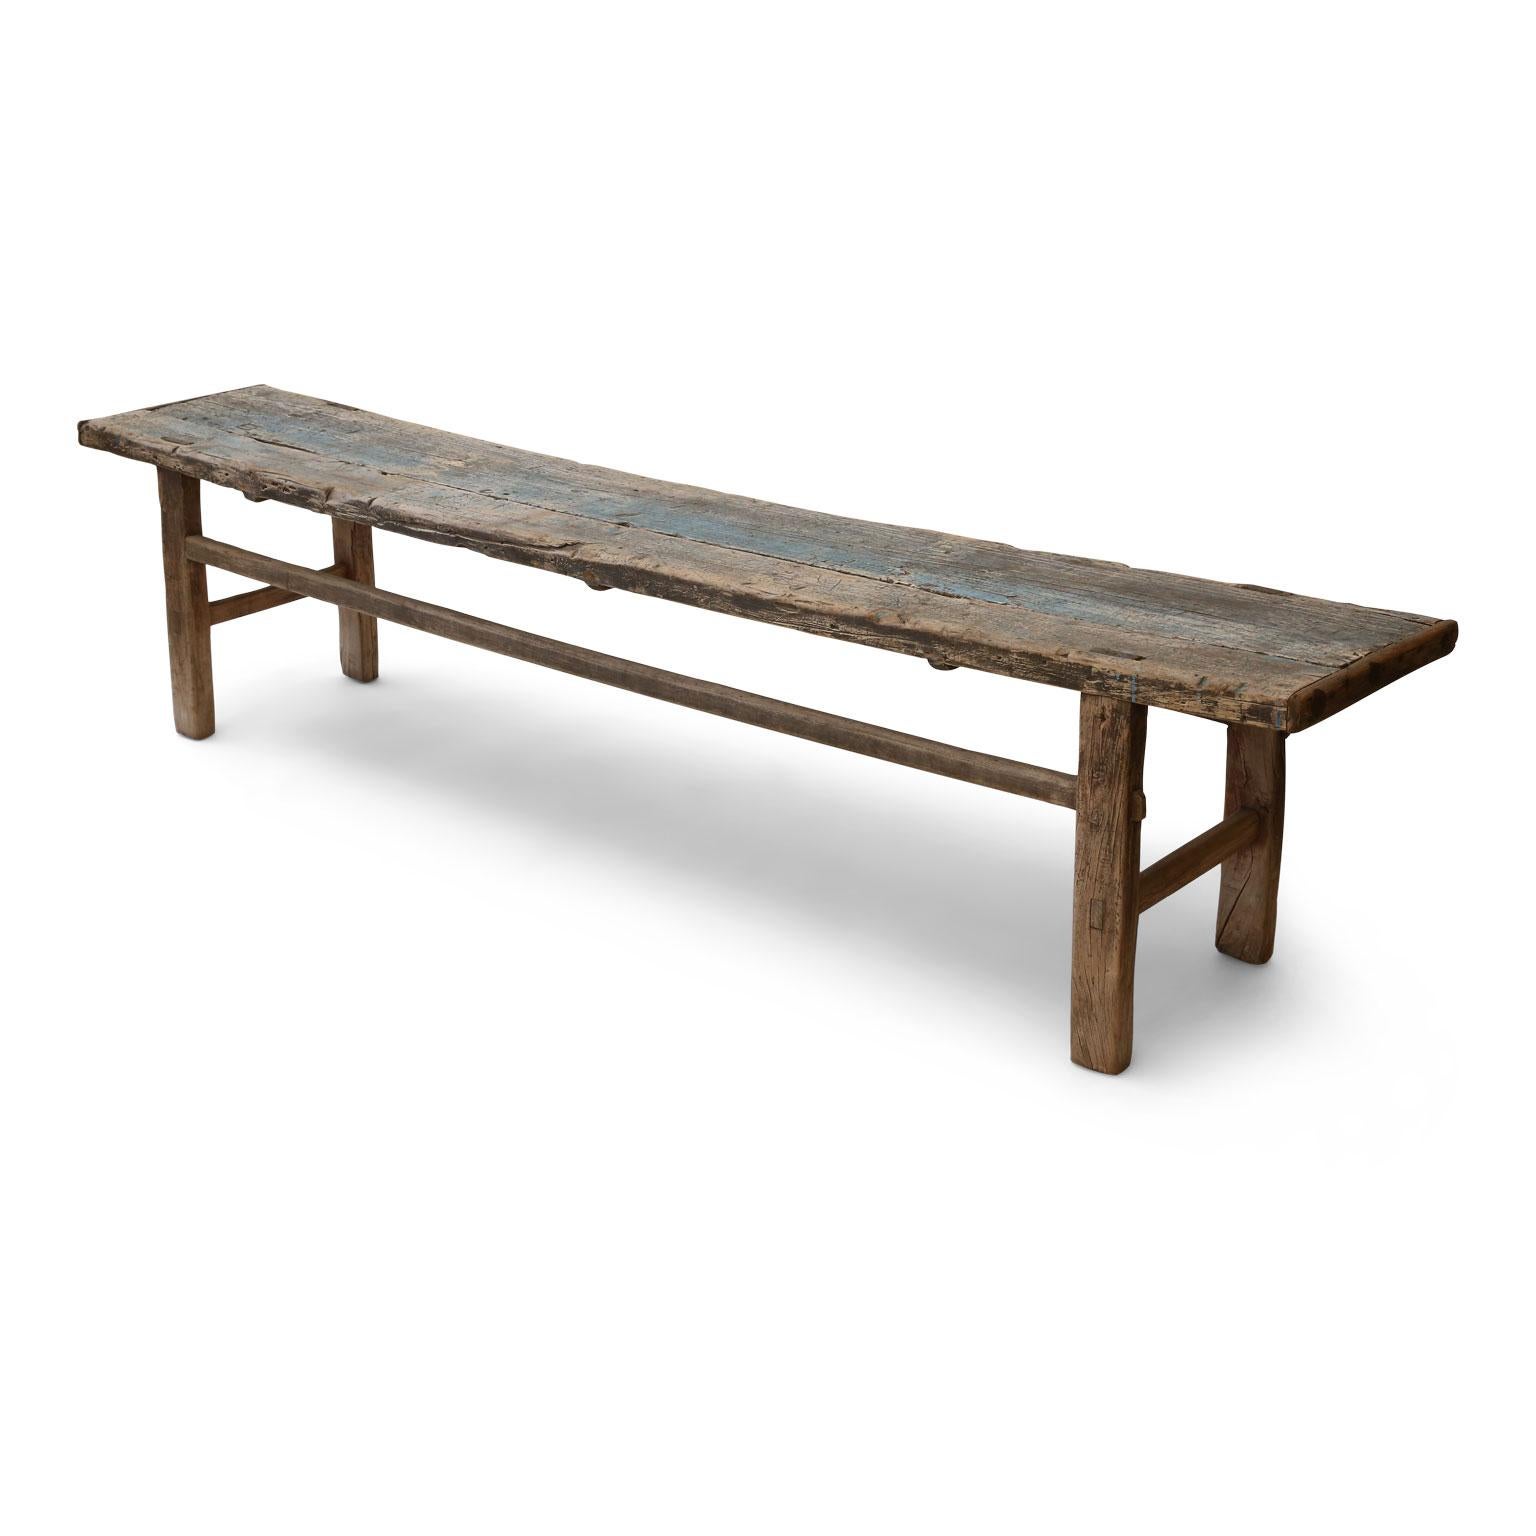 Long Chinese elm bench retaining remnants of original blue painted patina, (circa 1860-1900). Perfectly suited to almost any style of interior due to its simple shape and lines.